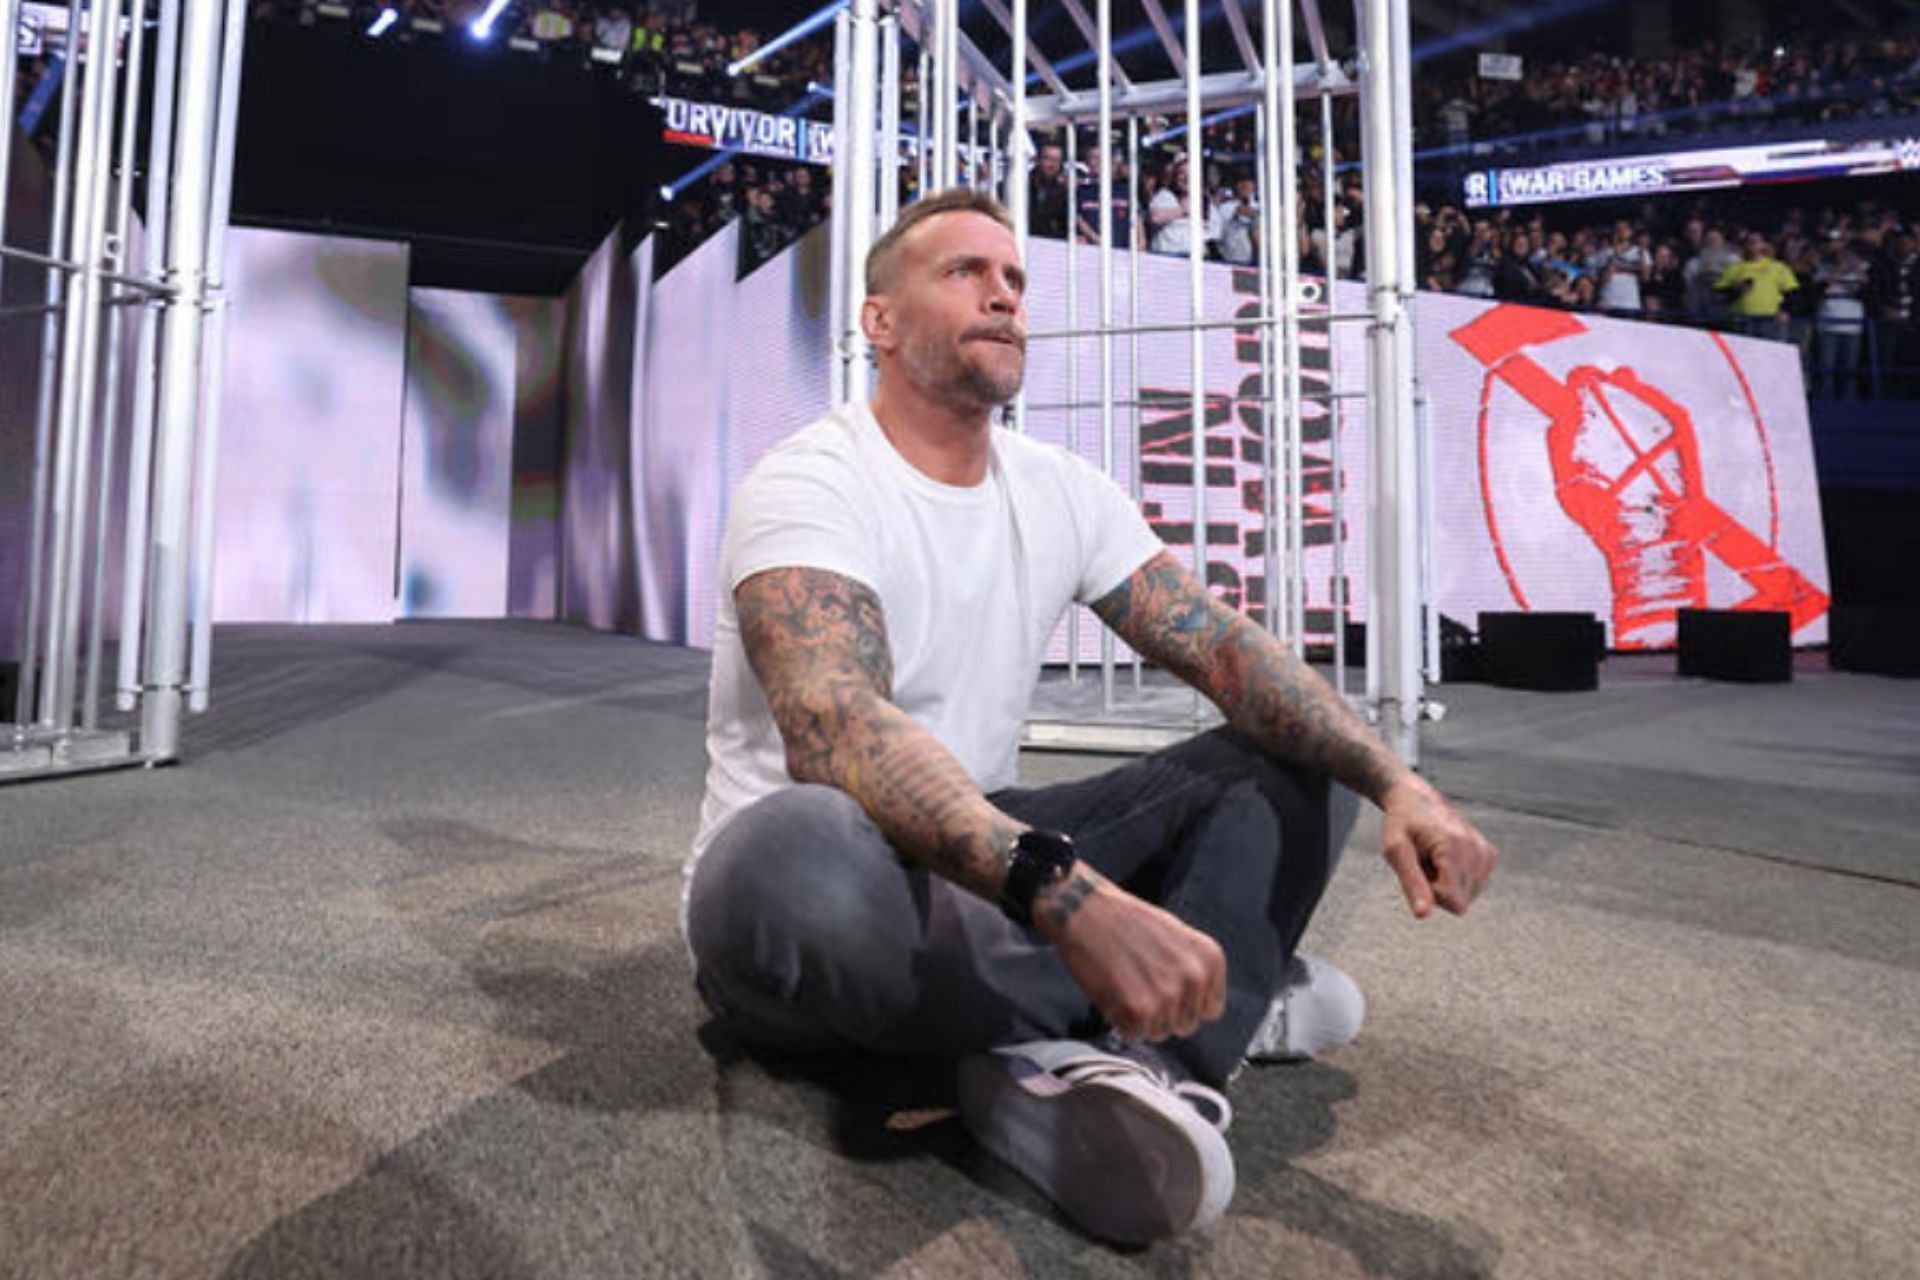 CM Punk is still remembered by young AEW wrestlers [Image Credits: wwe.com]